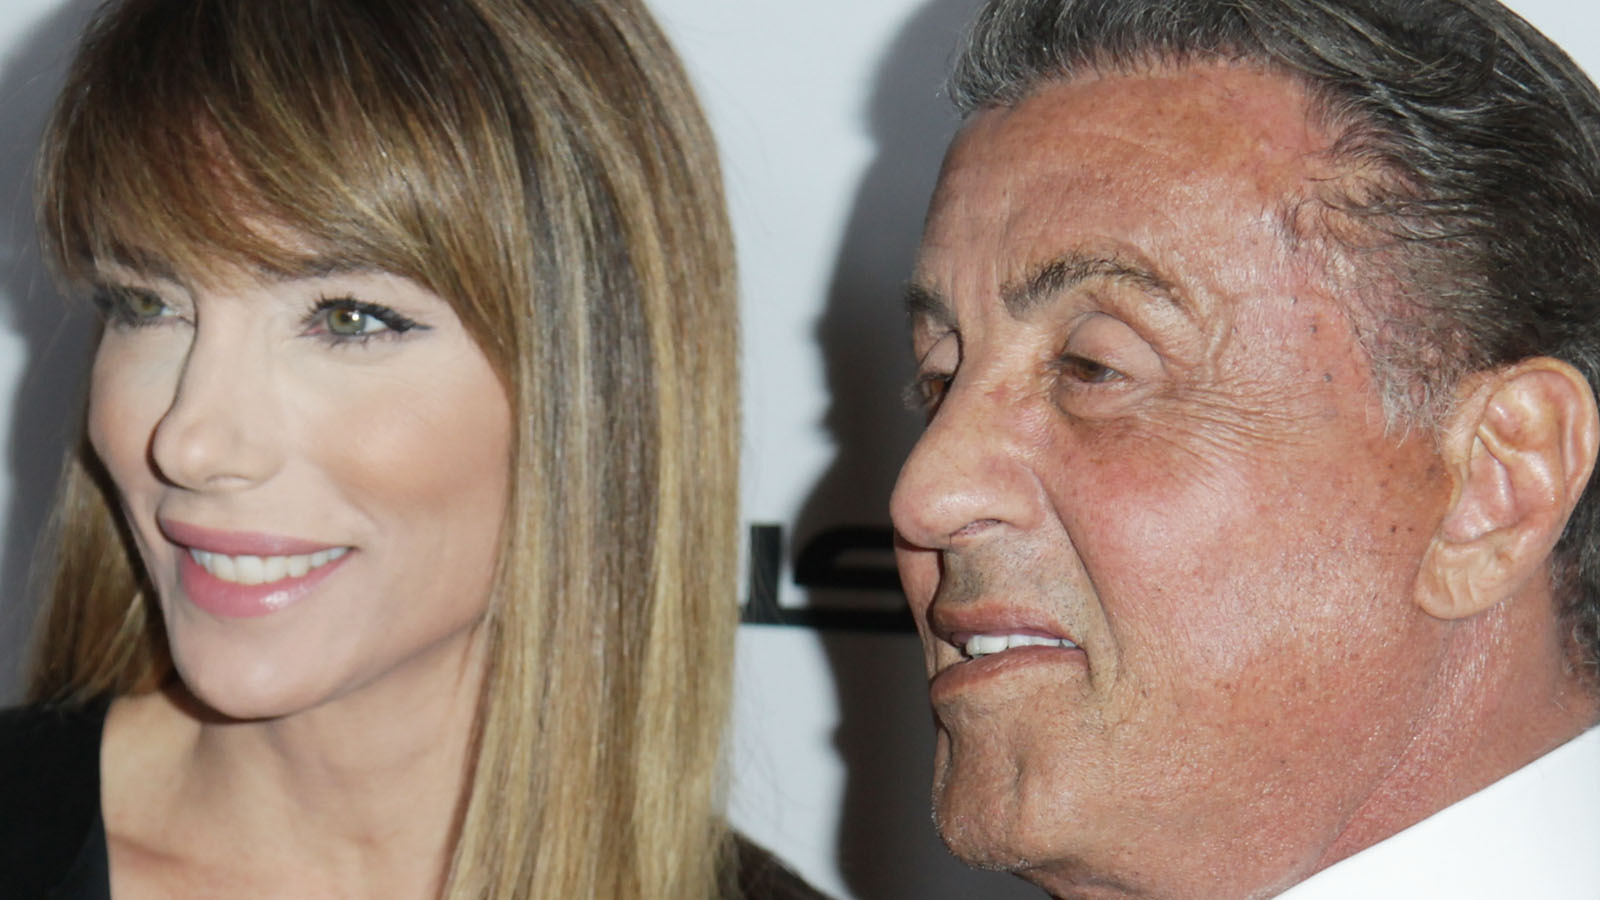 The Rumored Reason for Sylvester Stallone and Jennifer Flavin’s Divorce is Pretty Odd